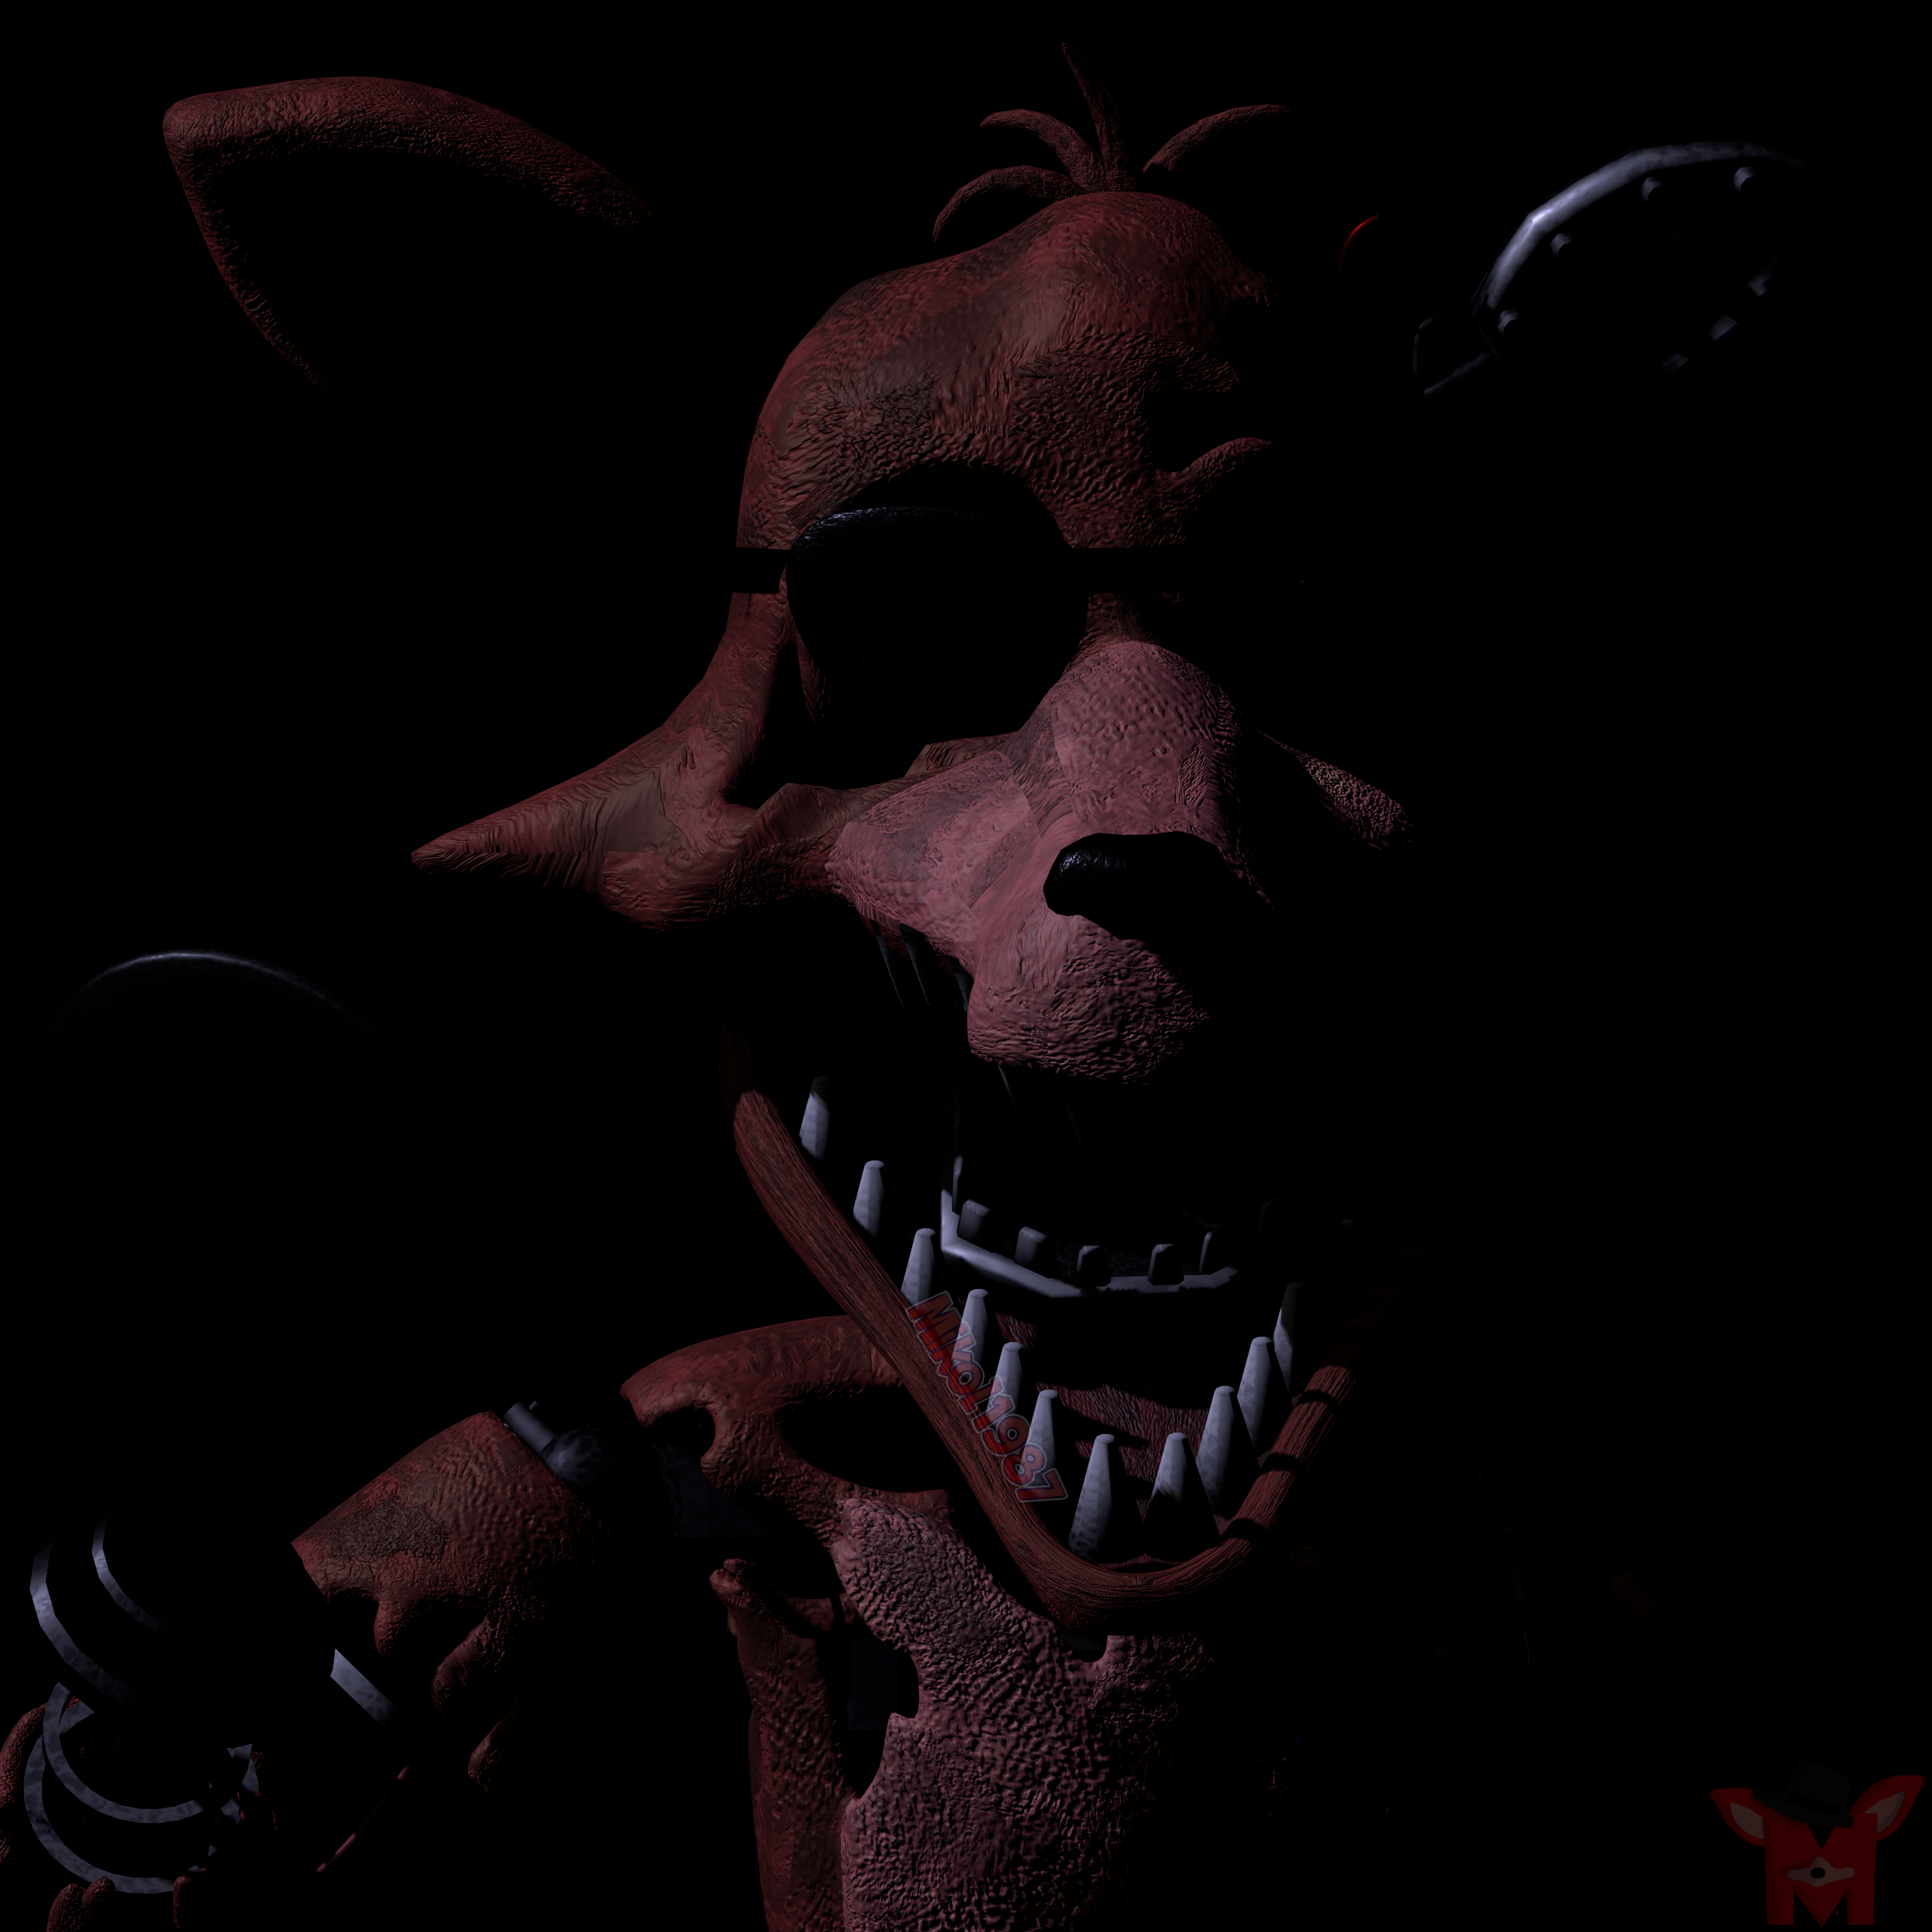 FNaF SFM: Withered Foxy by Mikol1987 on DeviantArt